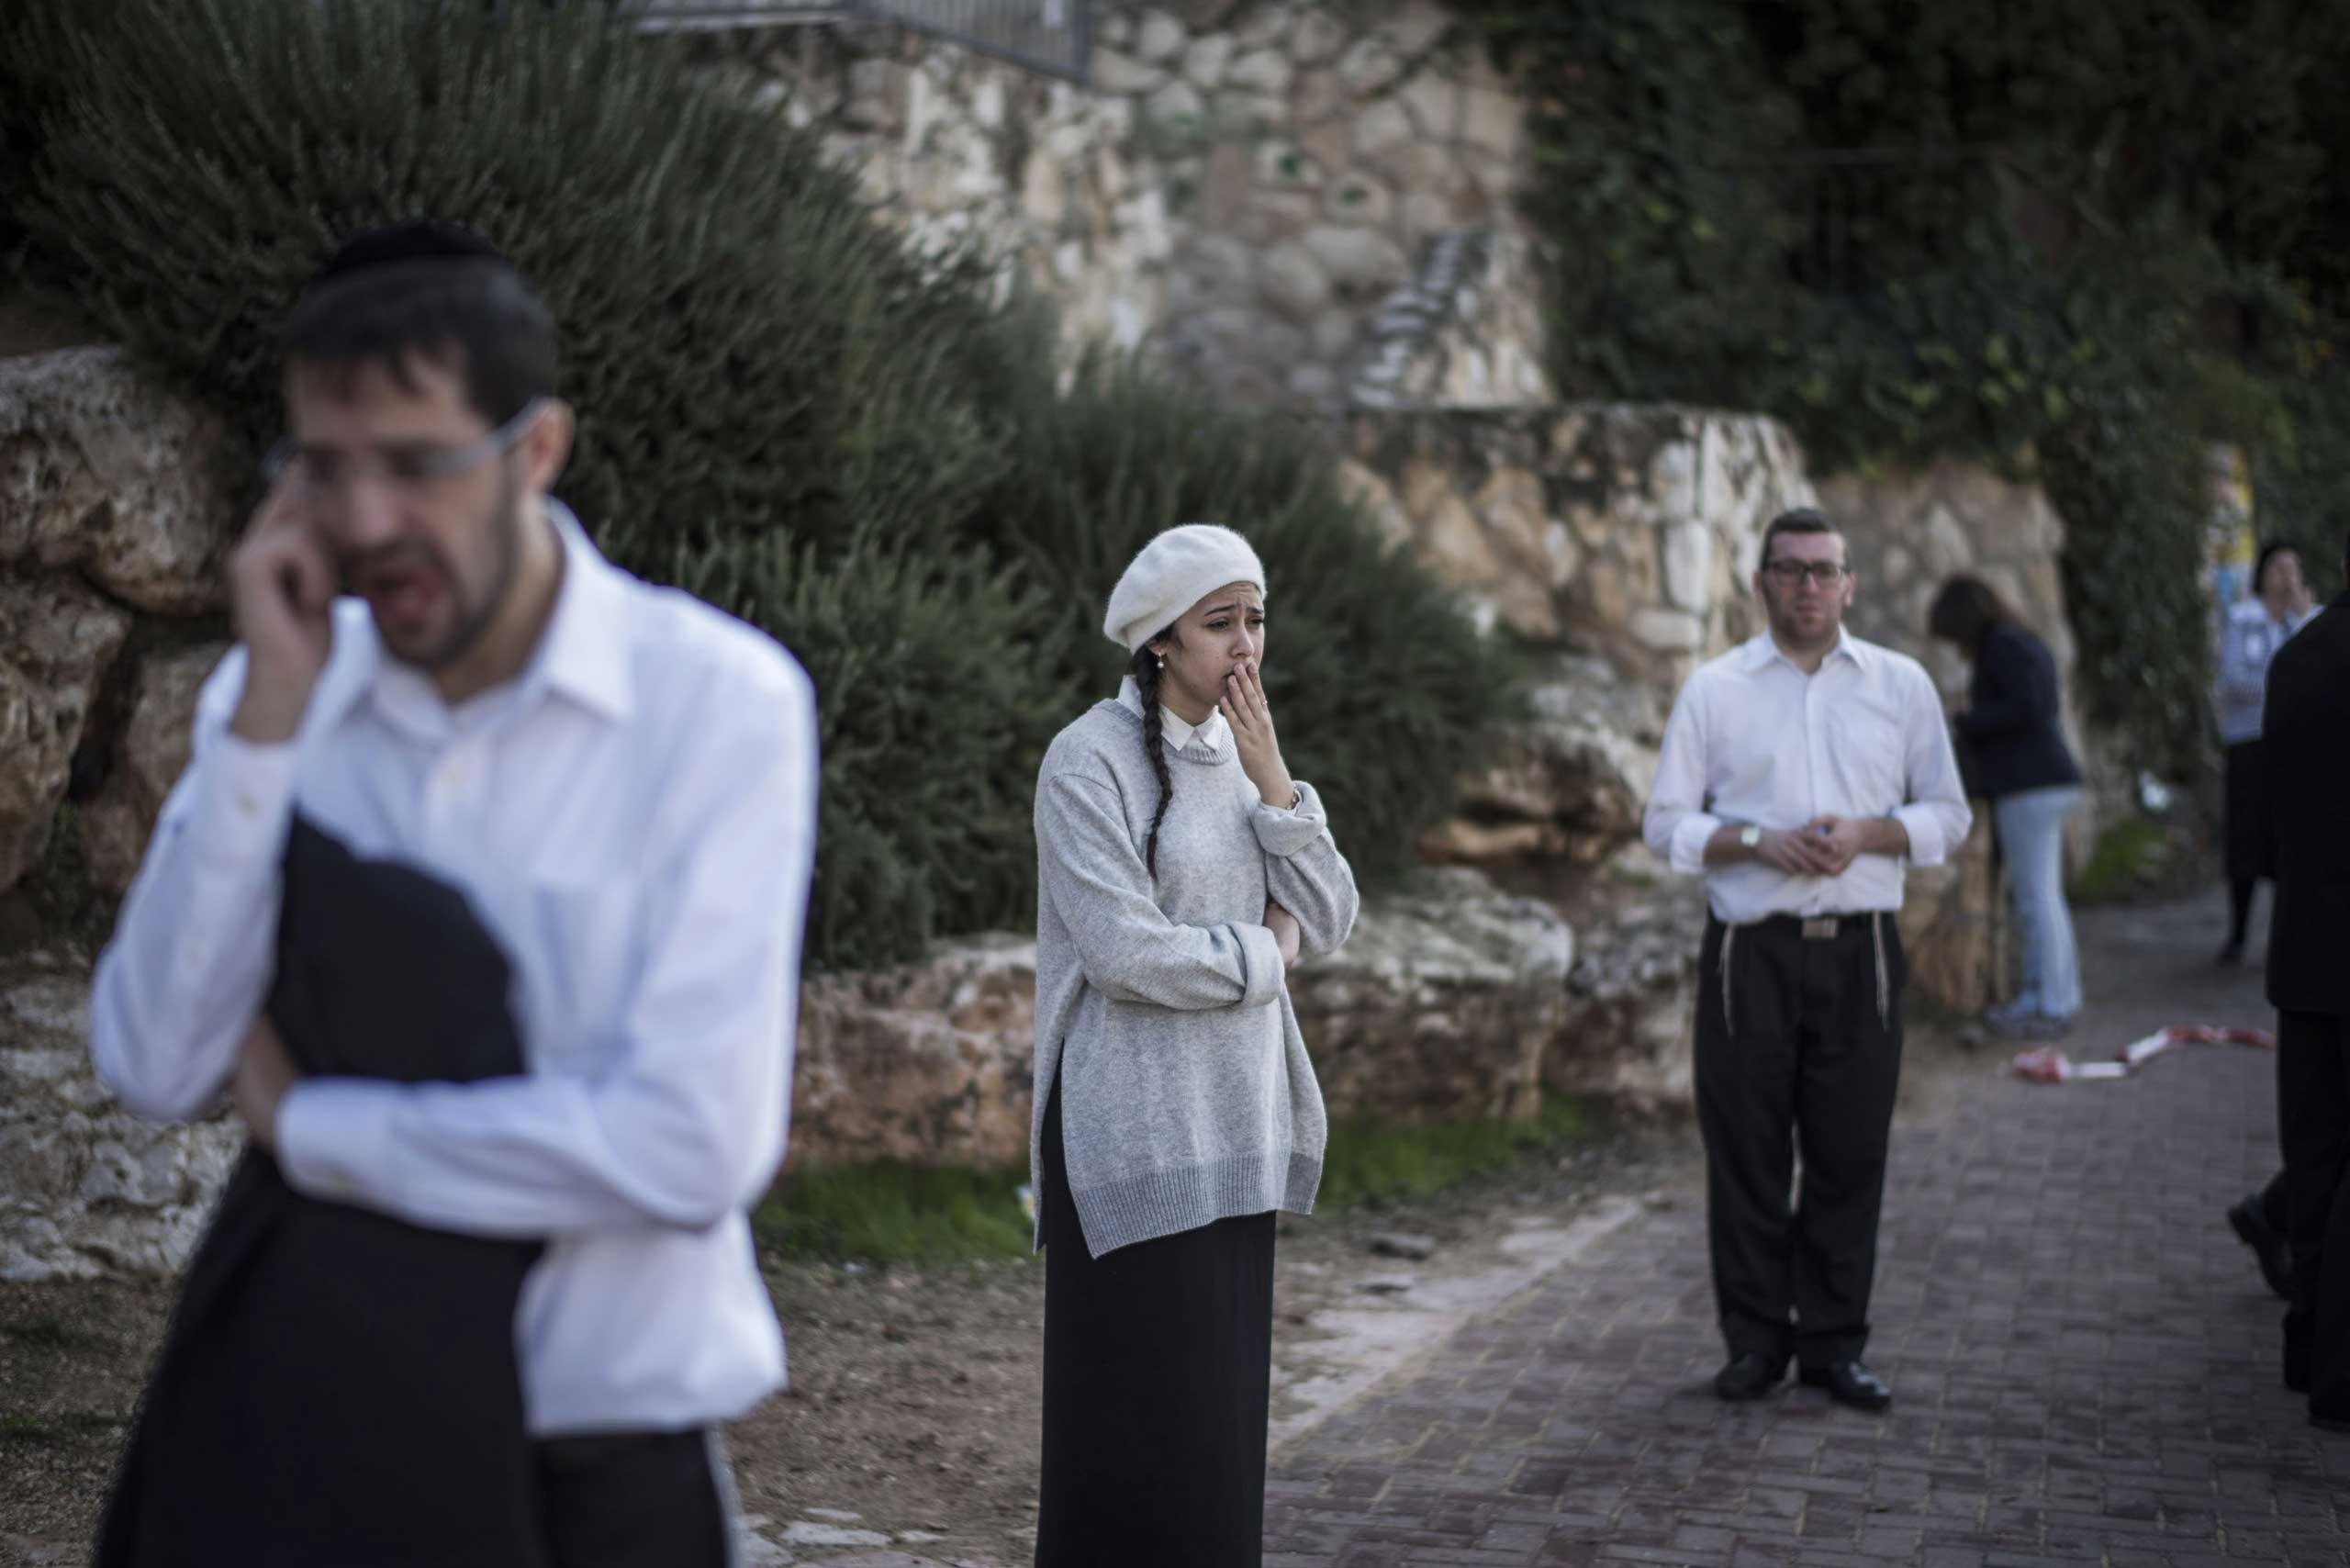 People react as they stand outside a synagogue in Jerusalem on Nov. 18, 2014.